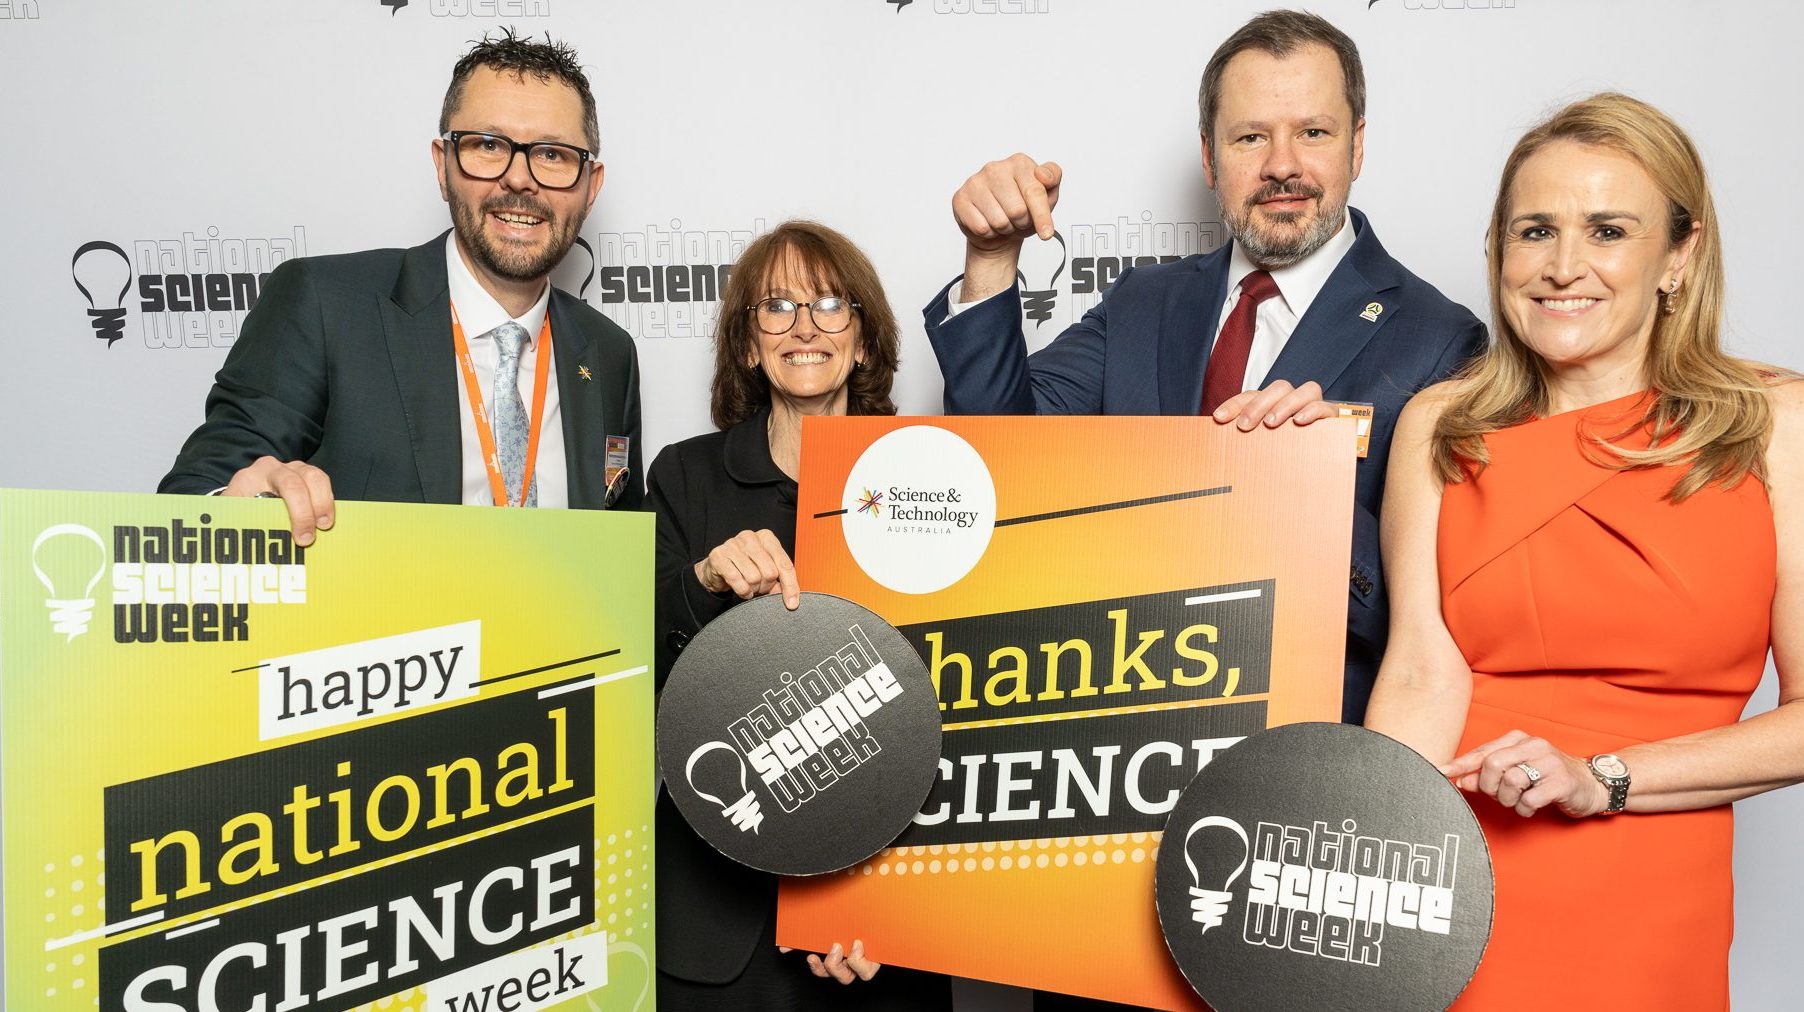 STA President Professor Mark Hutchinson, Dr Cathy Foley, Ed Husic MP and STA CEO Misha Schubert holding National Science Week signs and smiling at the camera.